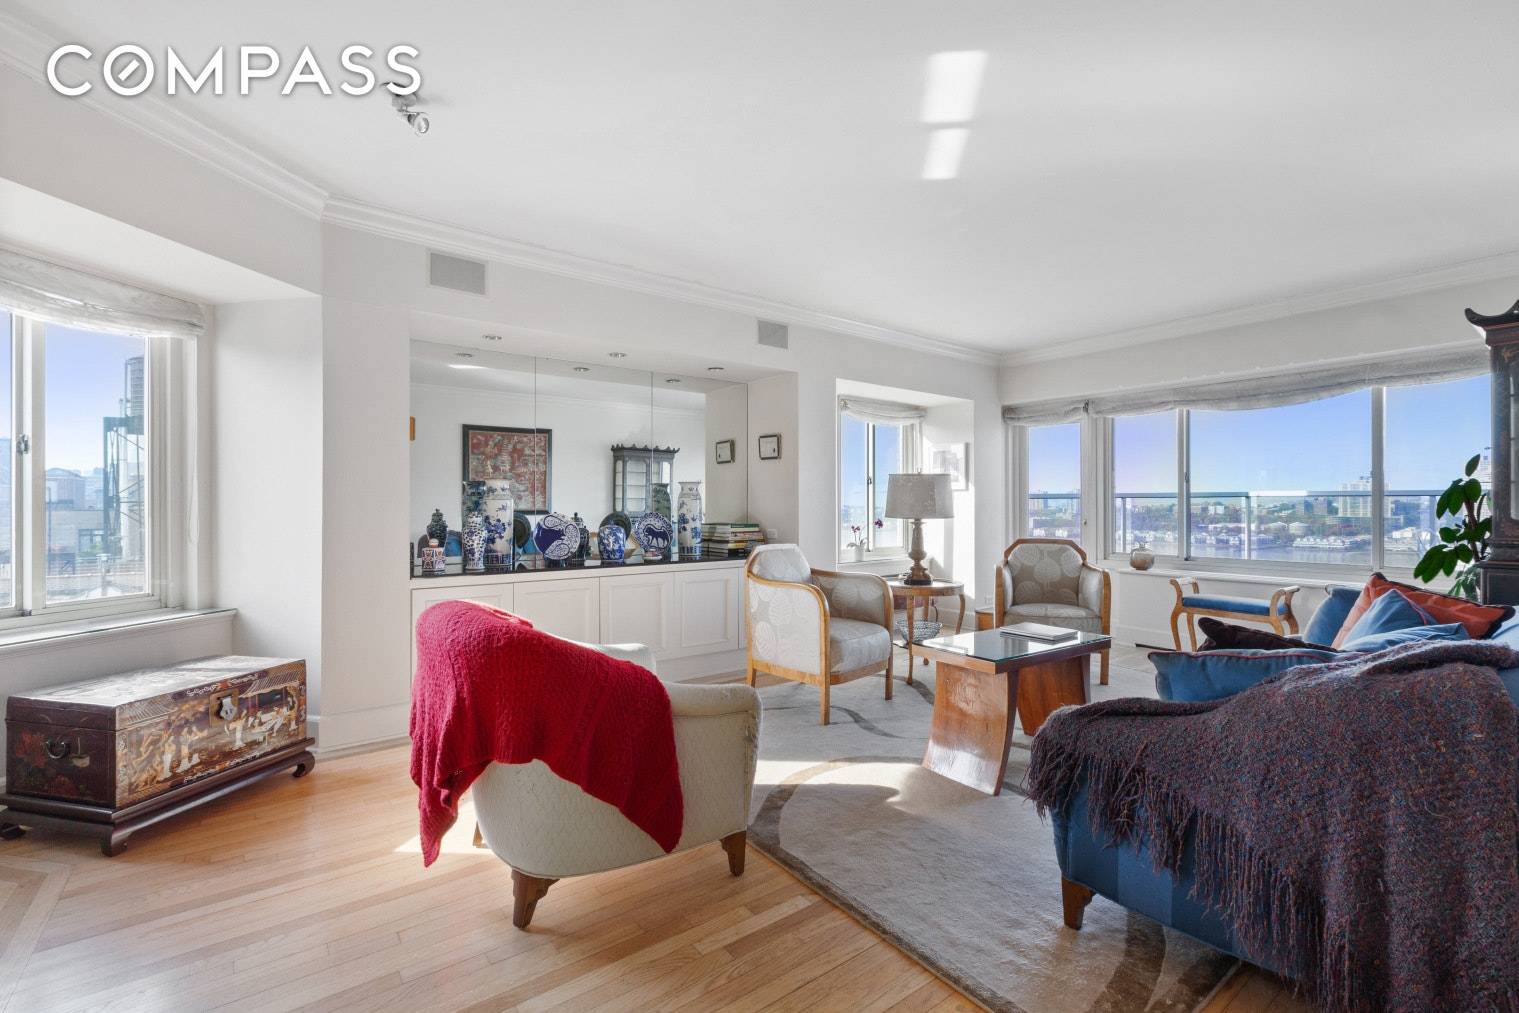 Sweeping Hudson River and southern city views greet you as you enter this penthouse corner apartment on a prime Upper West Side block.